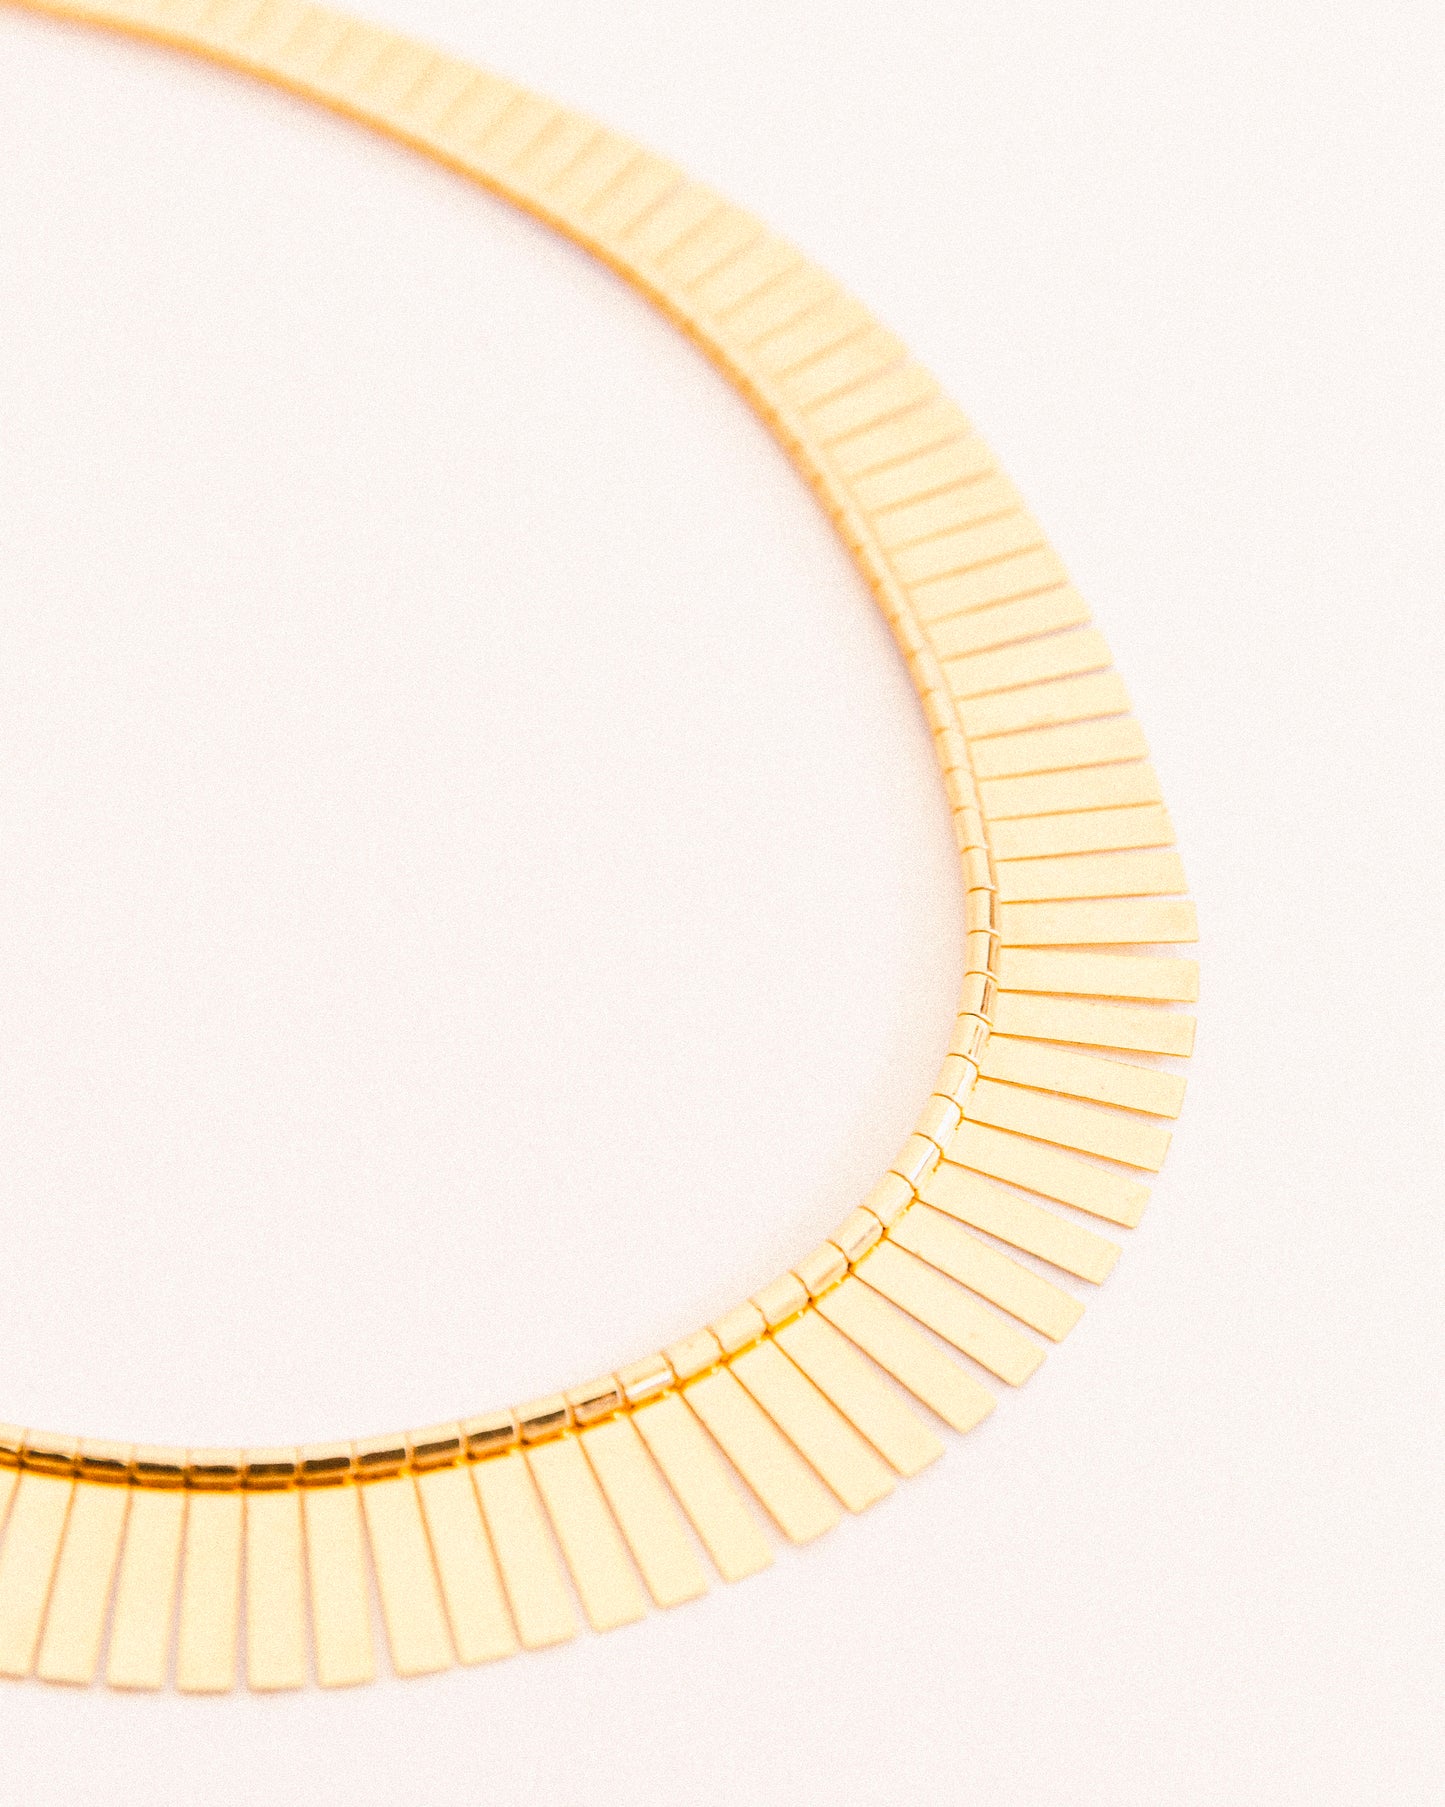 Two Tone Collar Necklace